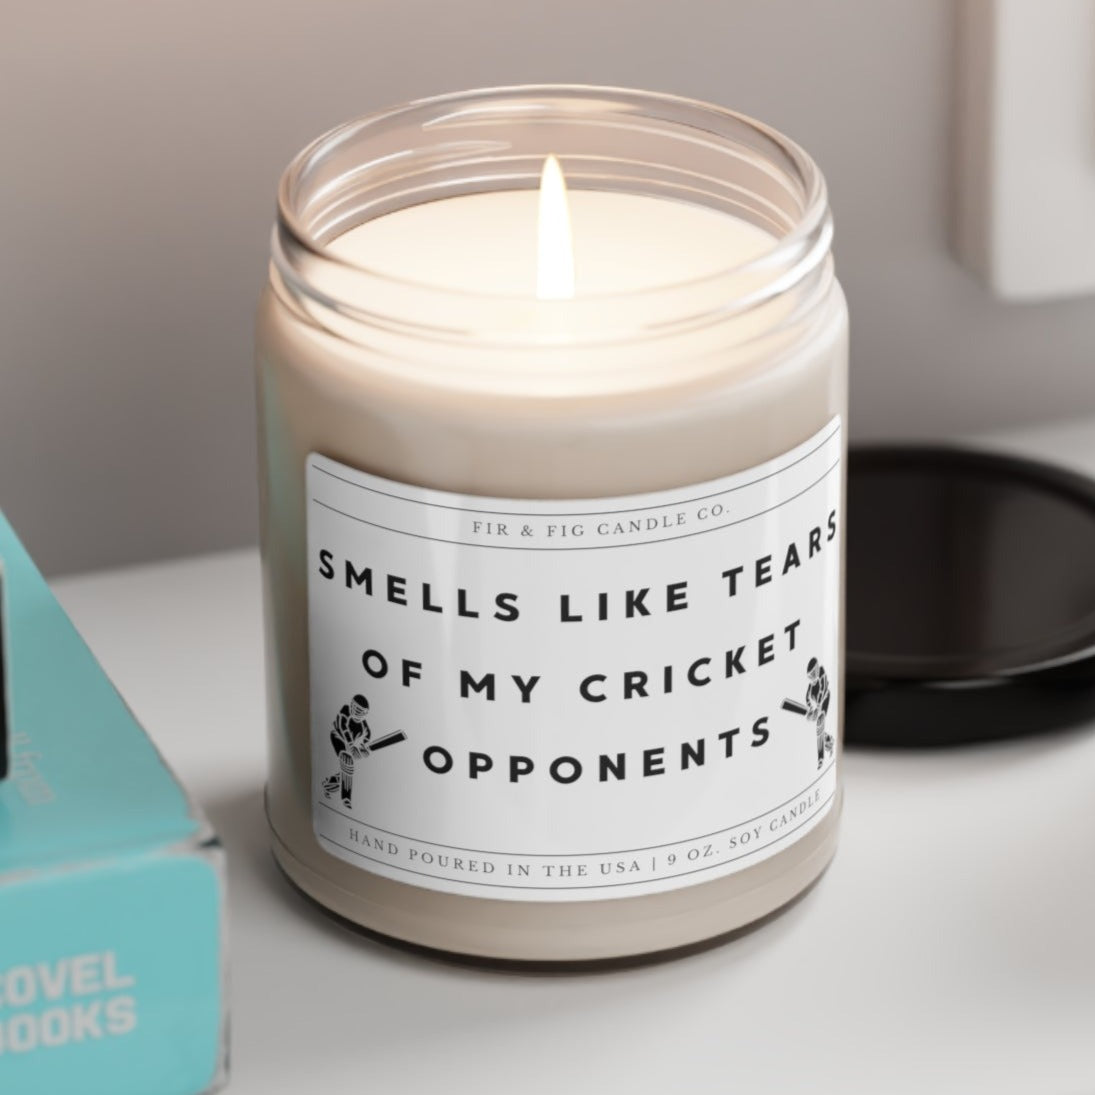 Smells Like Tears of my CRICKET Opponents 100% Eco-Friendly 9oz Soy Candle, Funny Candles, Gift for Him, Cricket candle Gift, Birthday Gift